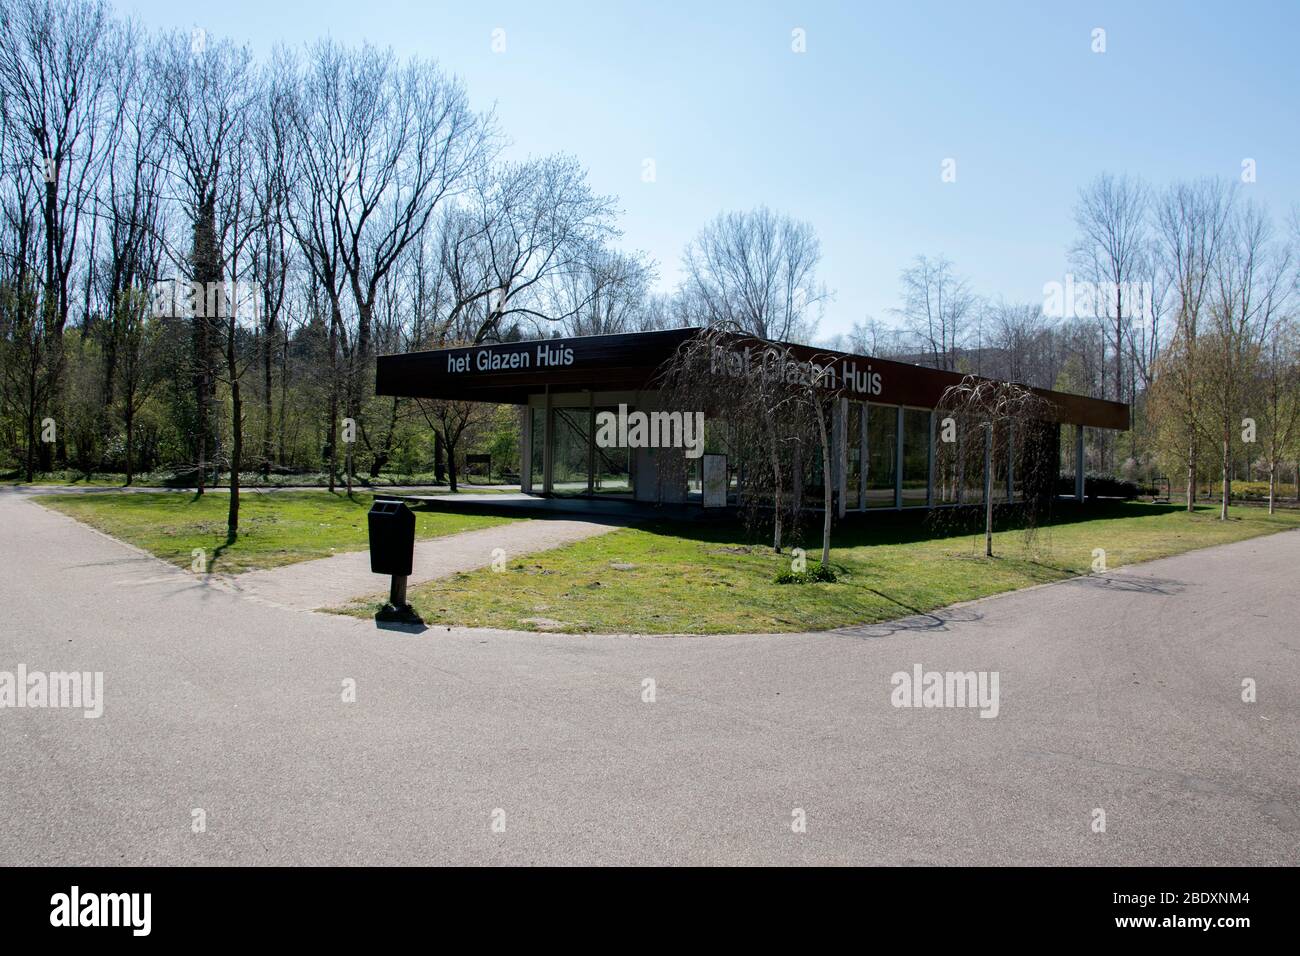 Het Glazen Huis Building At The Amstelpark Park At Amsterdam The  Netherlands 2020 Stock Photo - Alamy